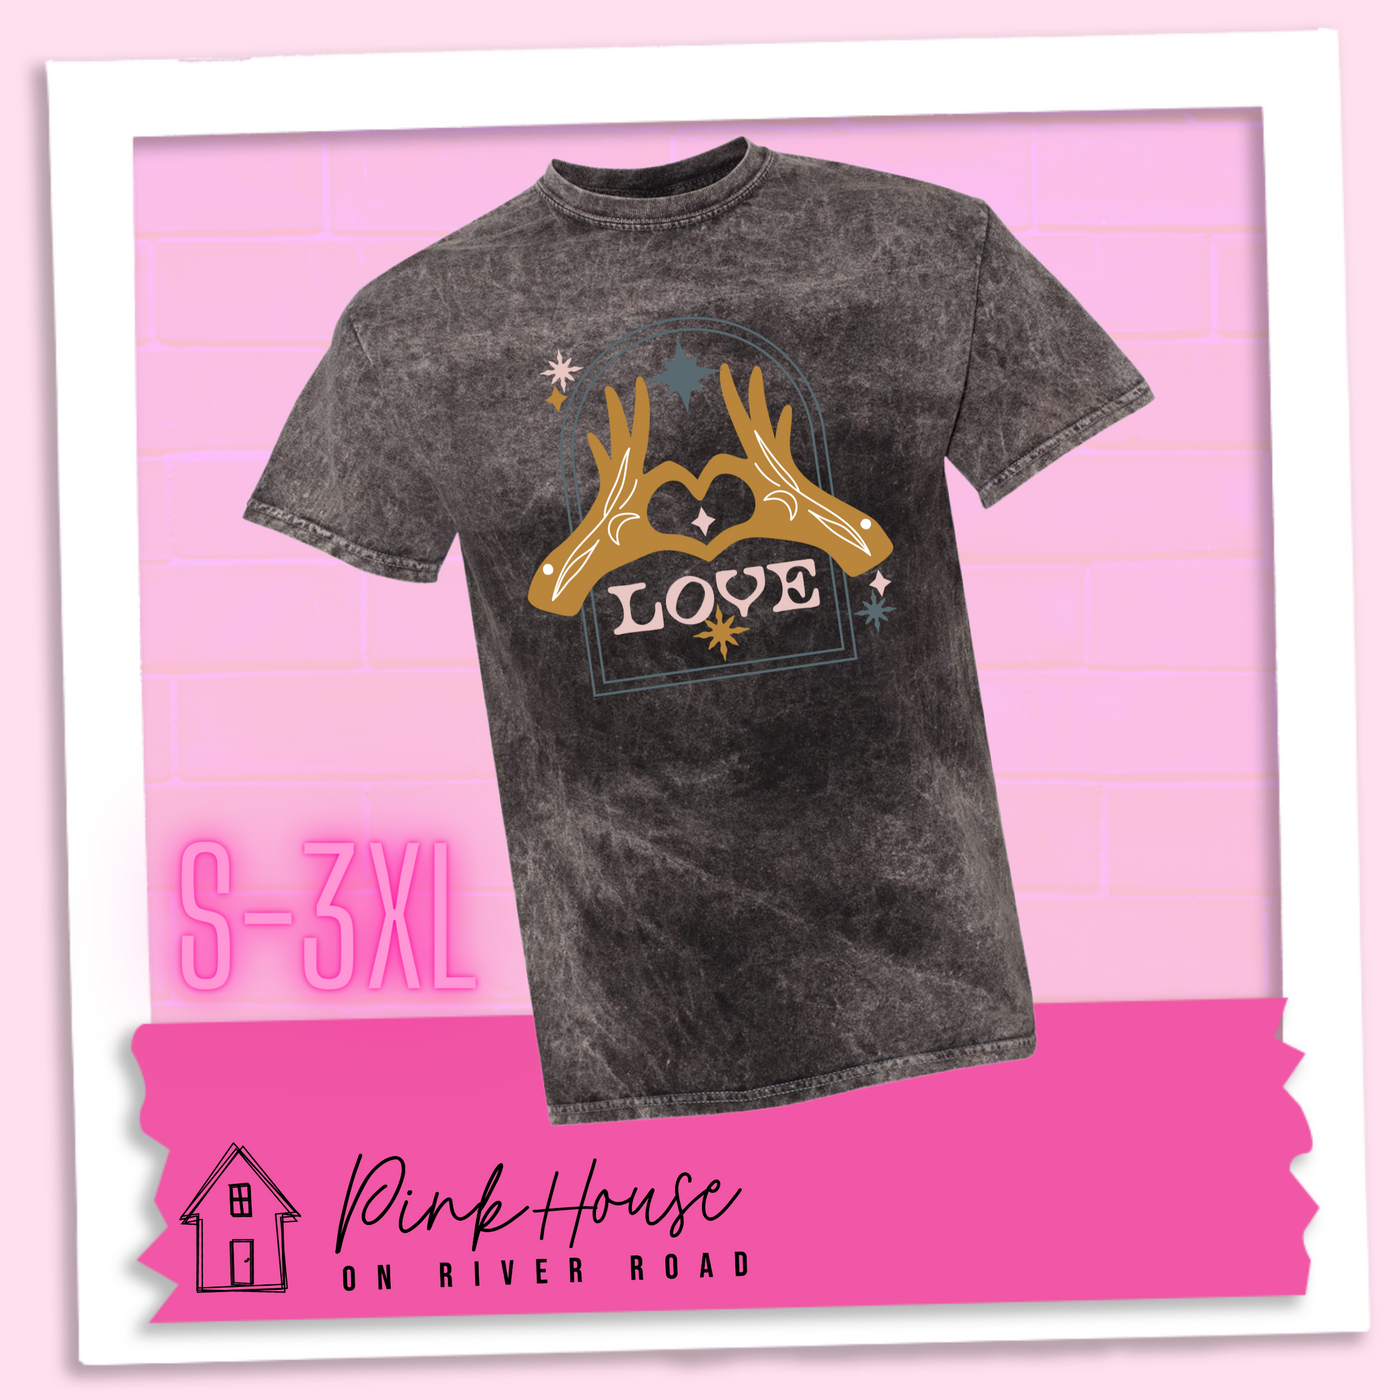 Black Mineral Wash tee with a graphic. Graphic is of two tattooed hands making a heart in front of an archway with stars and the word Love in the archway.